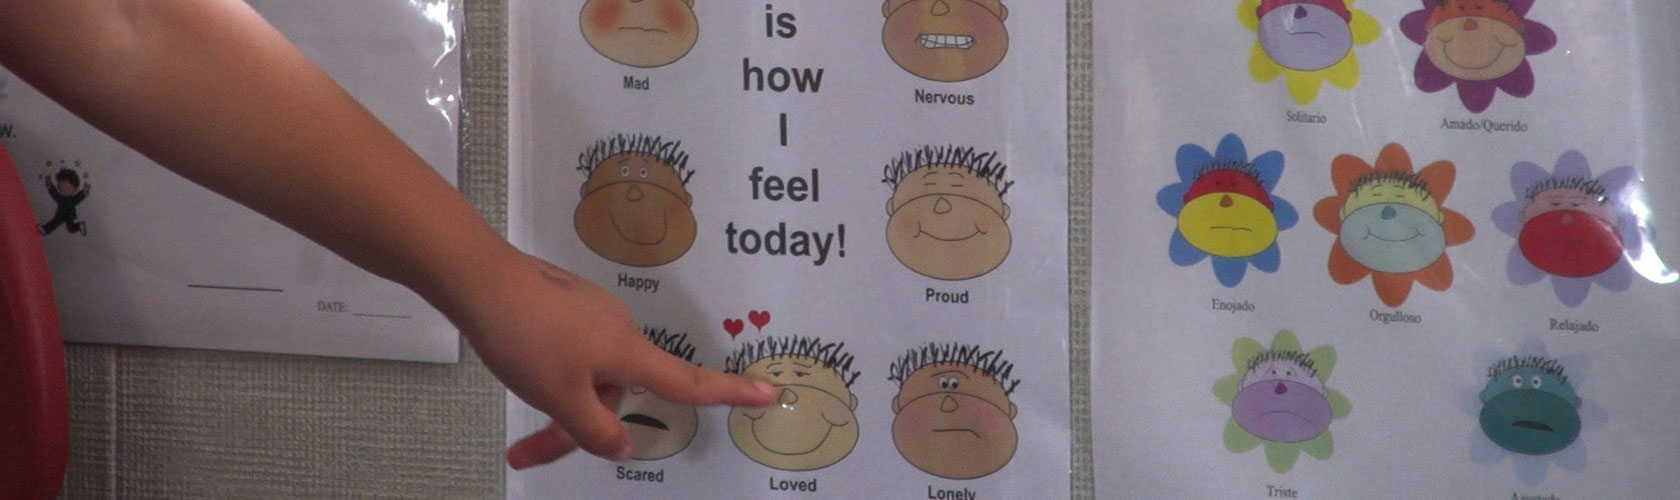 Child's hand pointing to "loved" feeling of feelings chart. Different facial expressions representing different feelings surround the headline "This is how I fell today!"